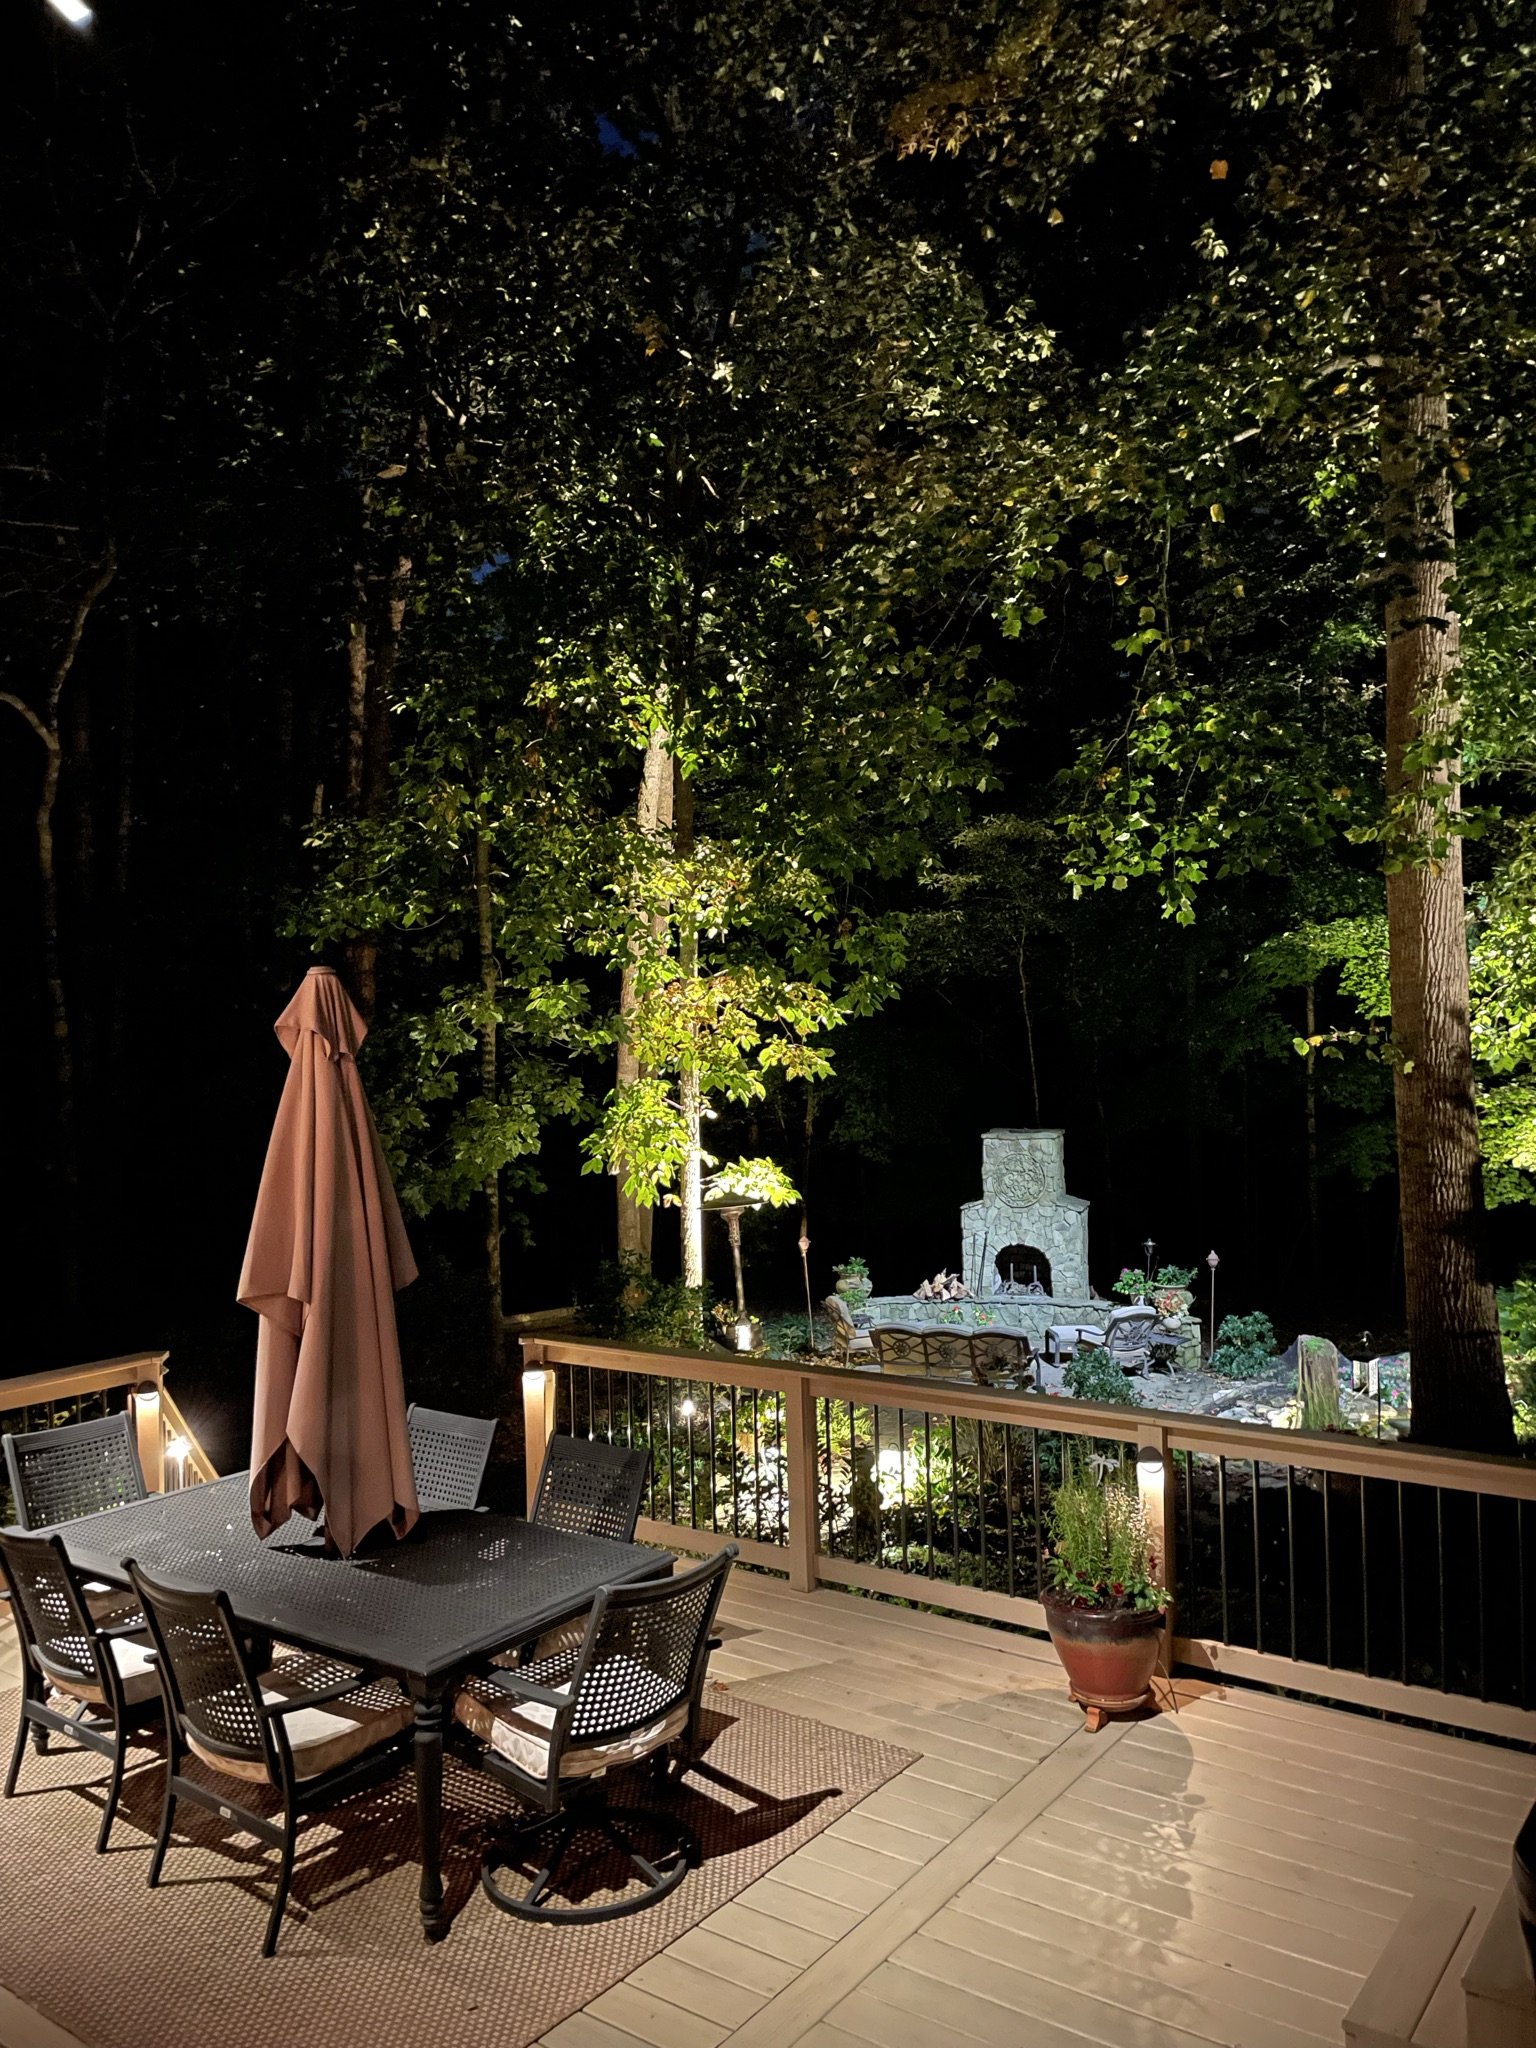  Overhead deck lighting illuminates an outdoor eating area. In the background you can see additional landscape lighting on the trees and outdoor fireplace. 